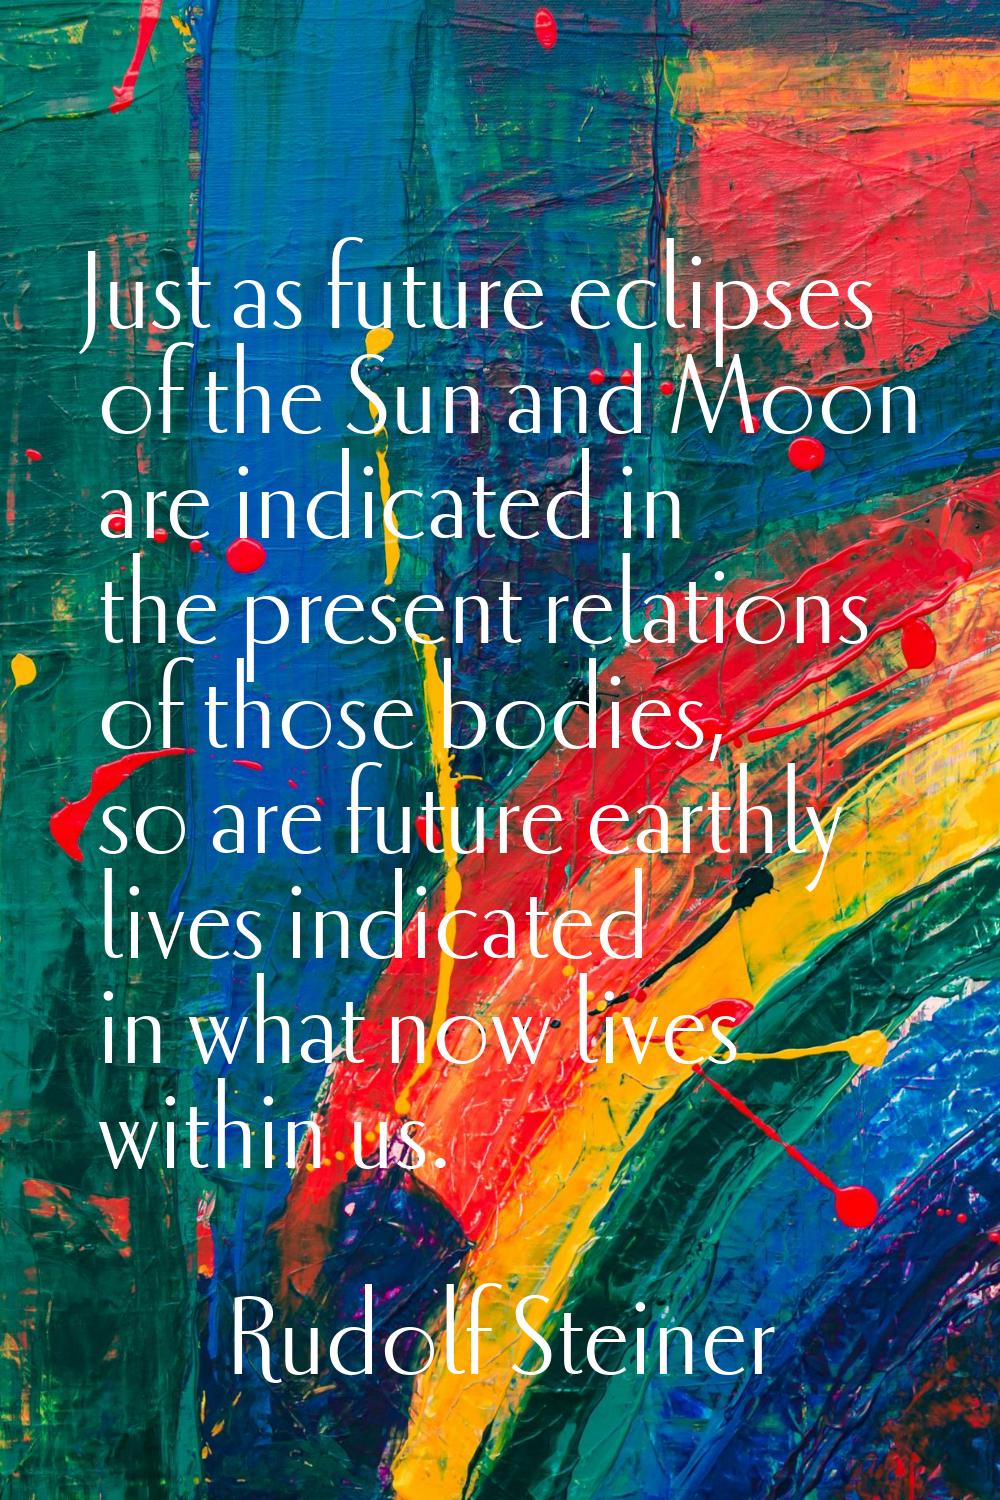 Just as future eclipses of the Sun and Moon are indicated in the present relations of those bodies,